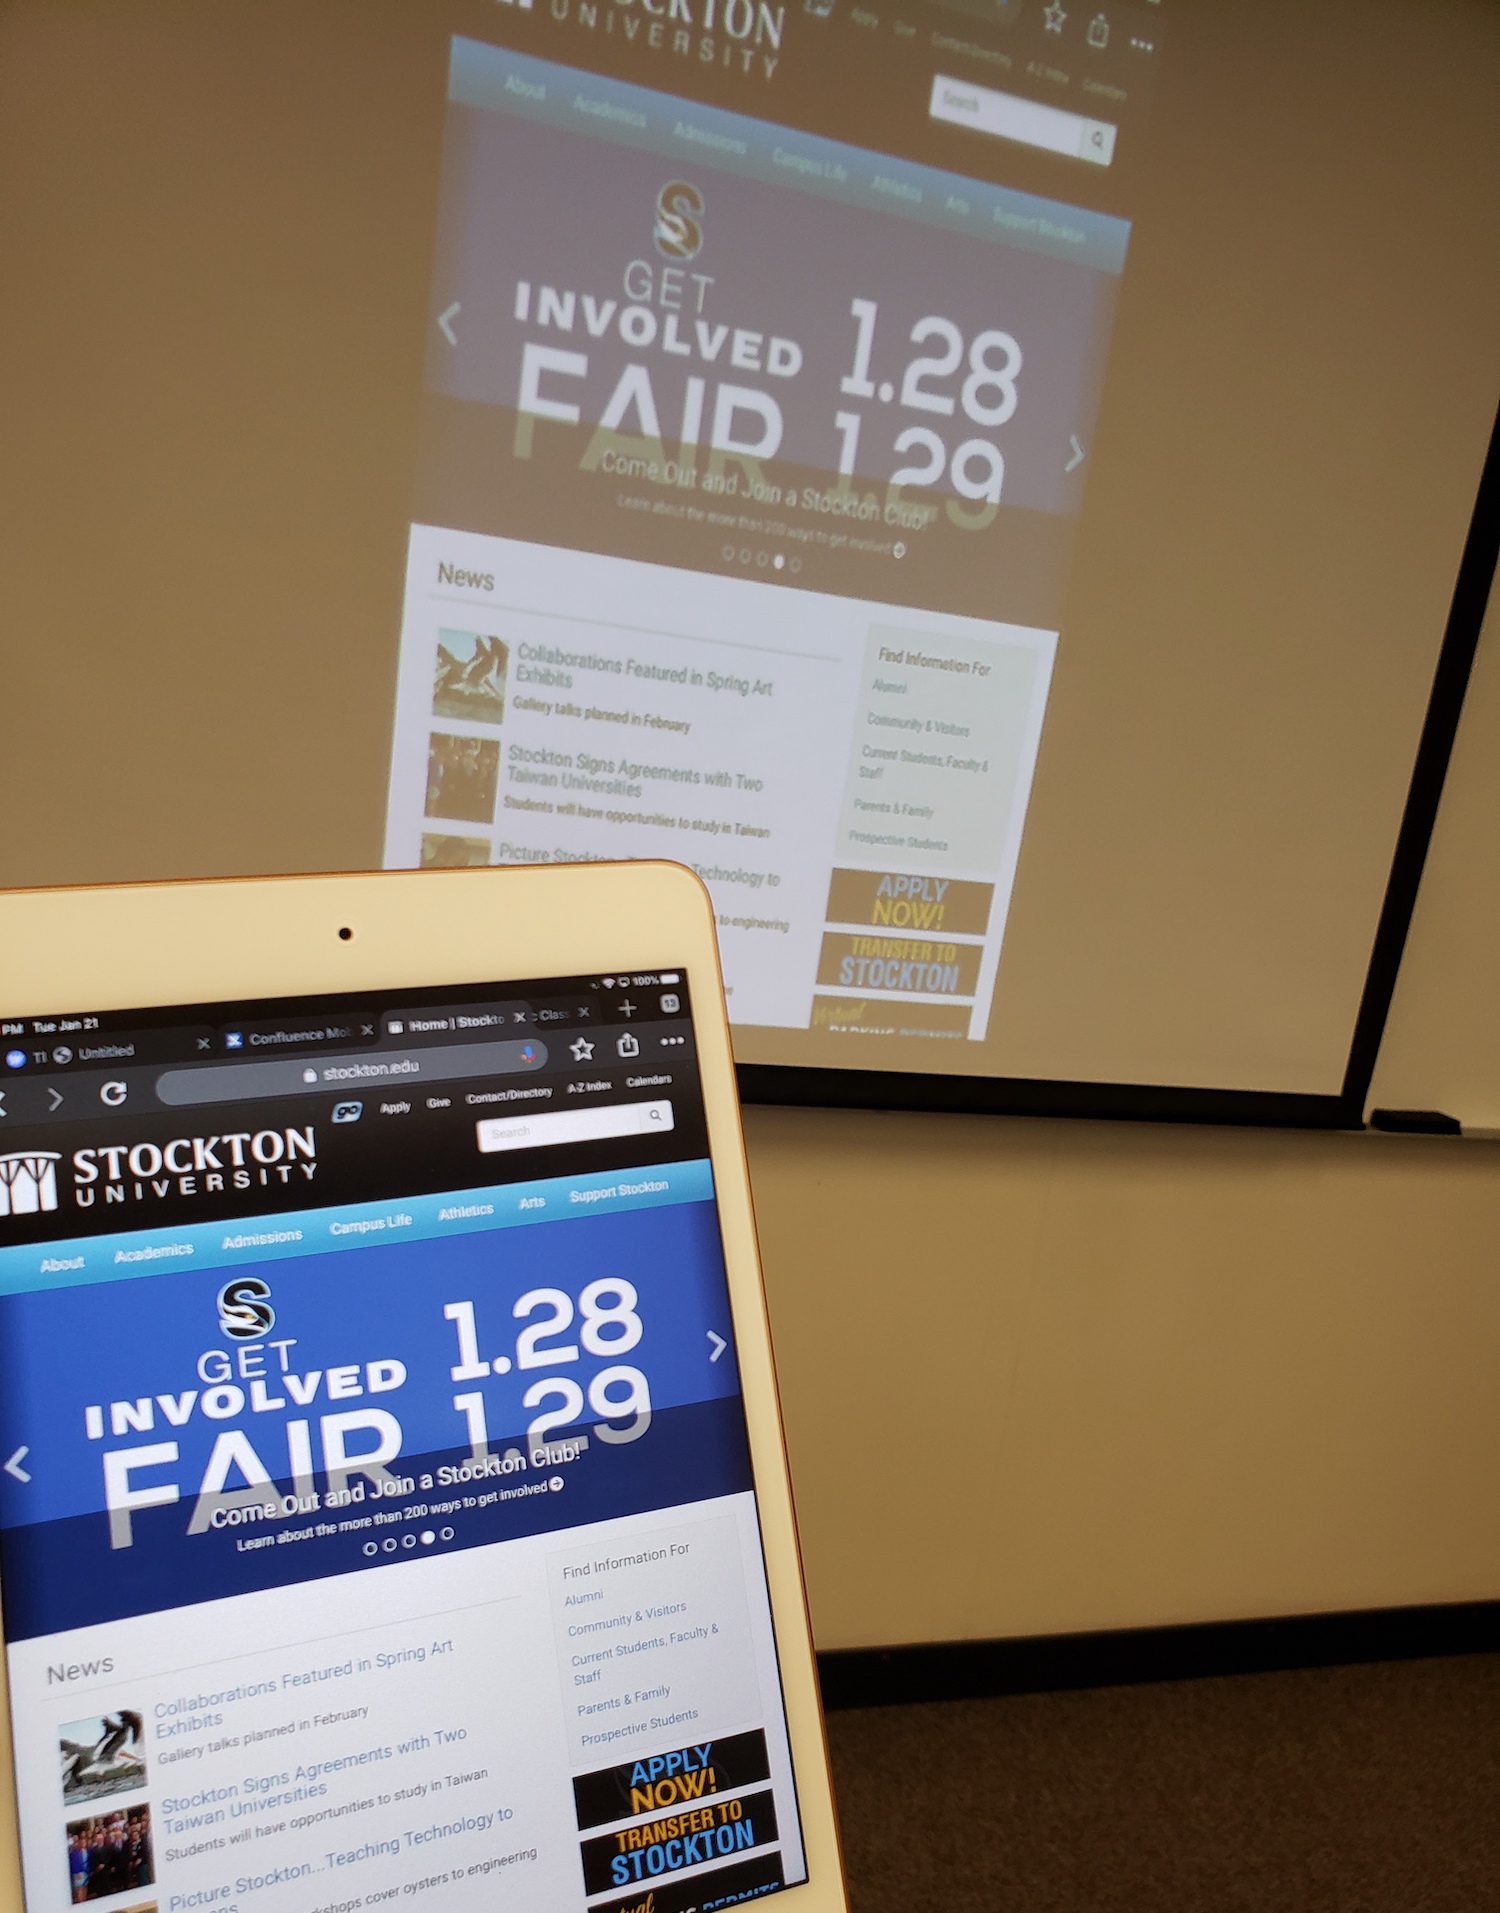 A picture of the ipad and projector screen together, showing an example of mirrored content.